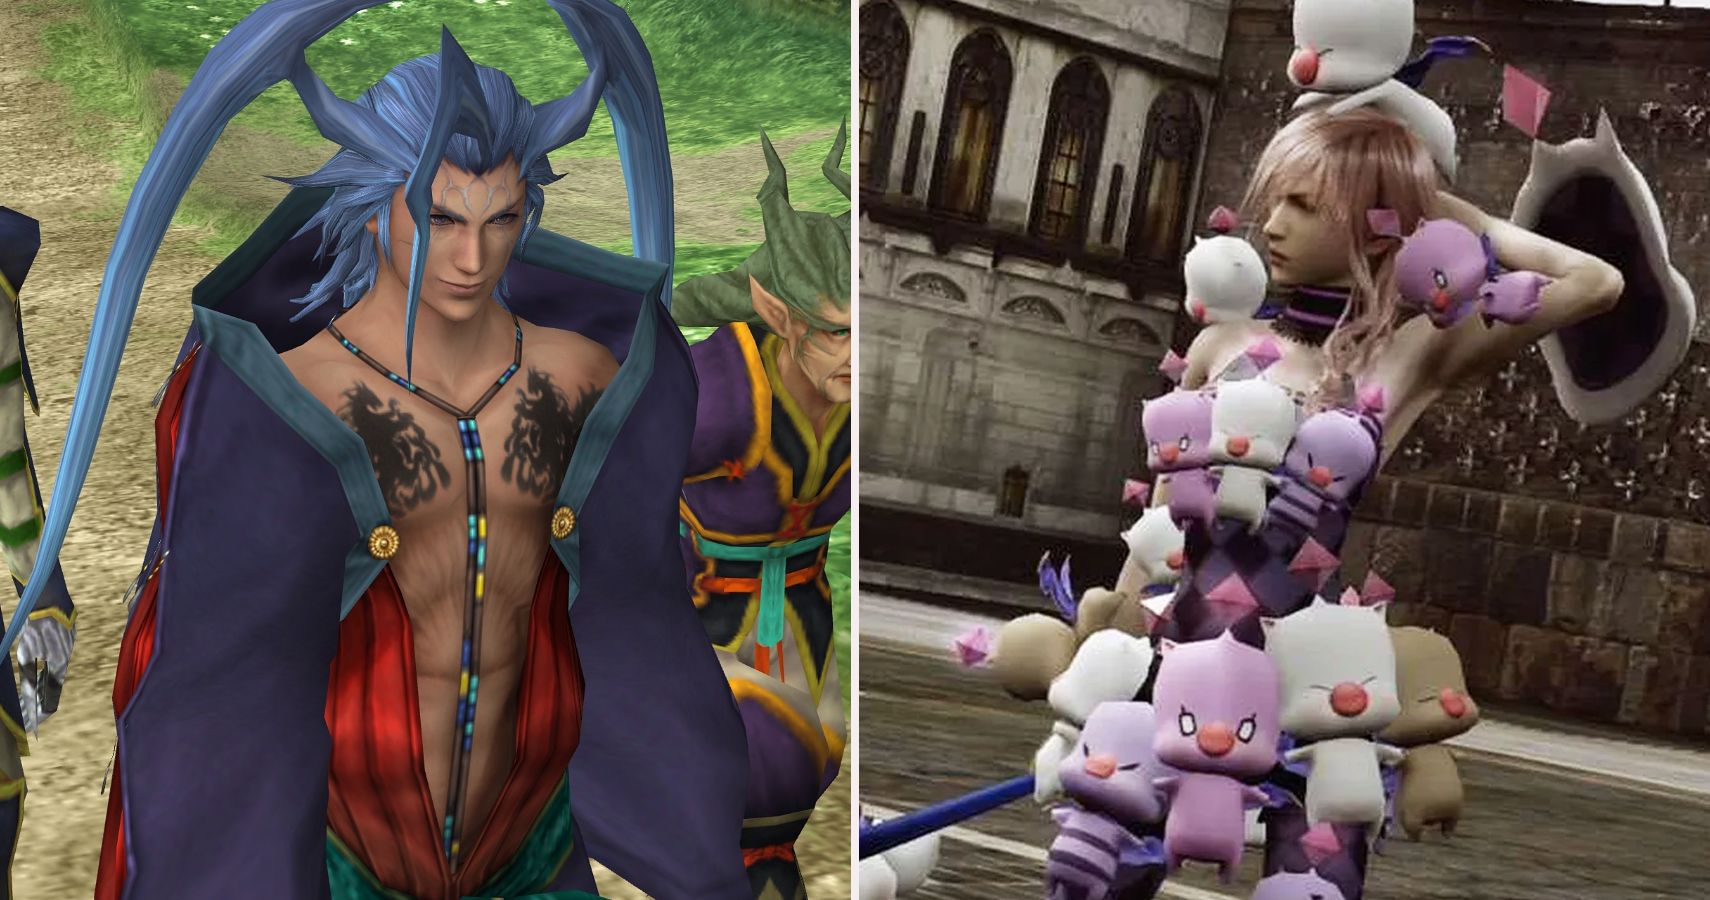 15 Final Fantasy Outfits That Will Make You Cringe